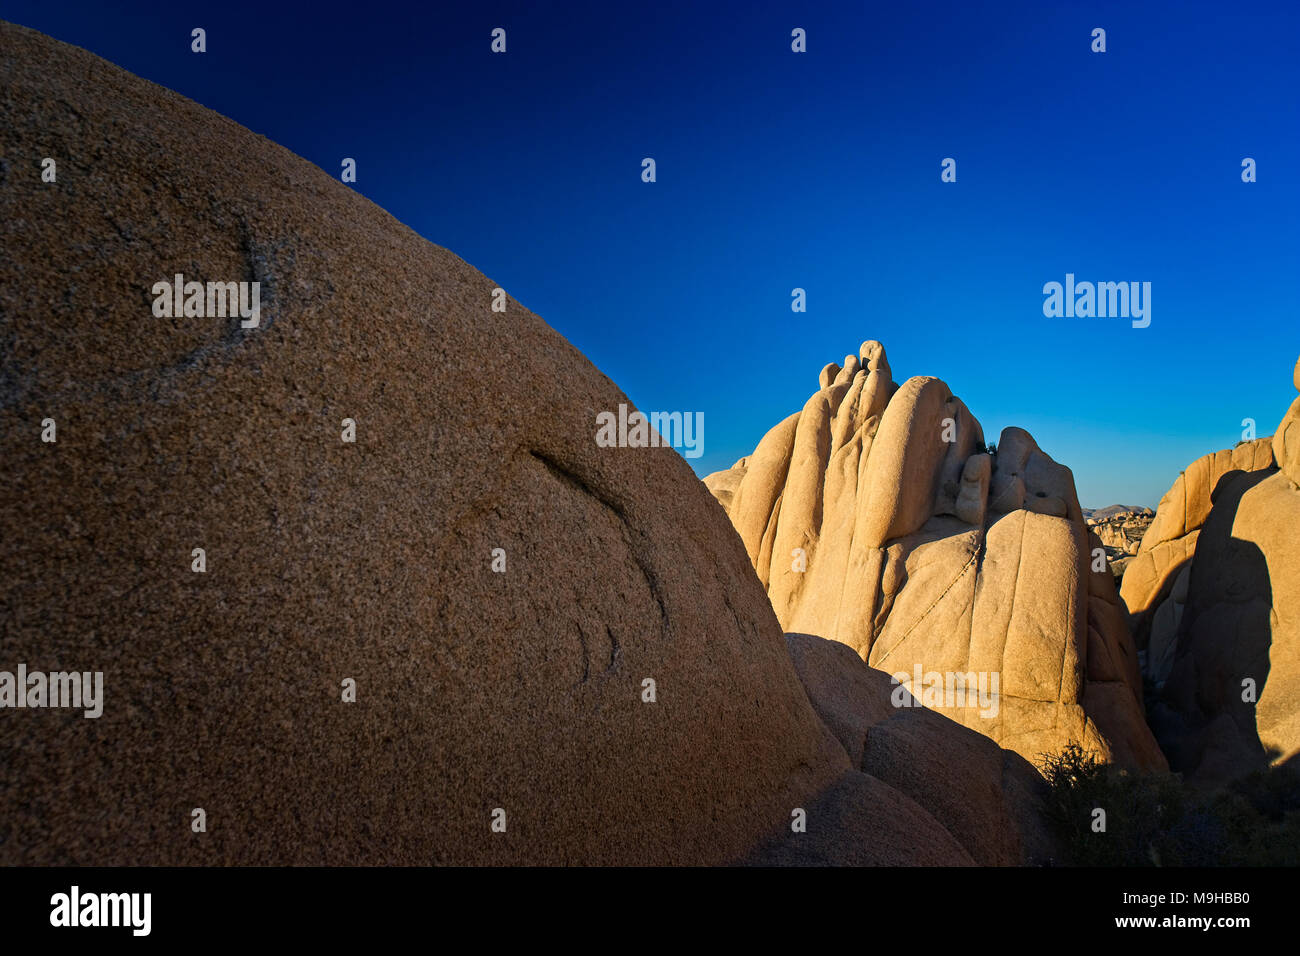 Huge bold Monzogranite rock formations in Joshua tree national Park in Southern California's Mohave Desert Stock Photo